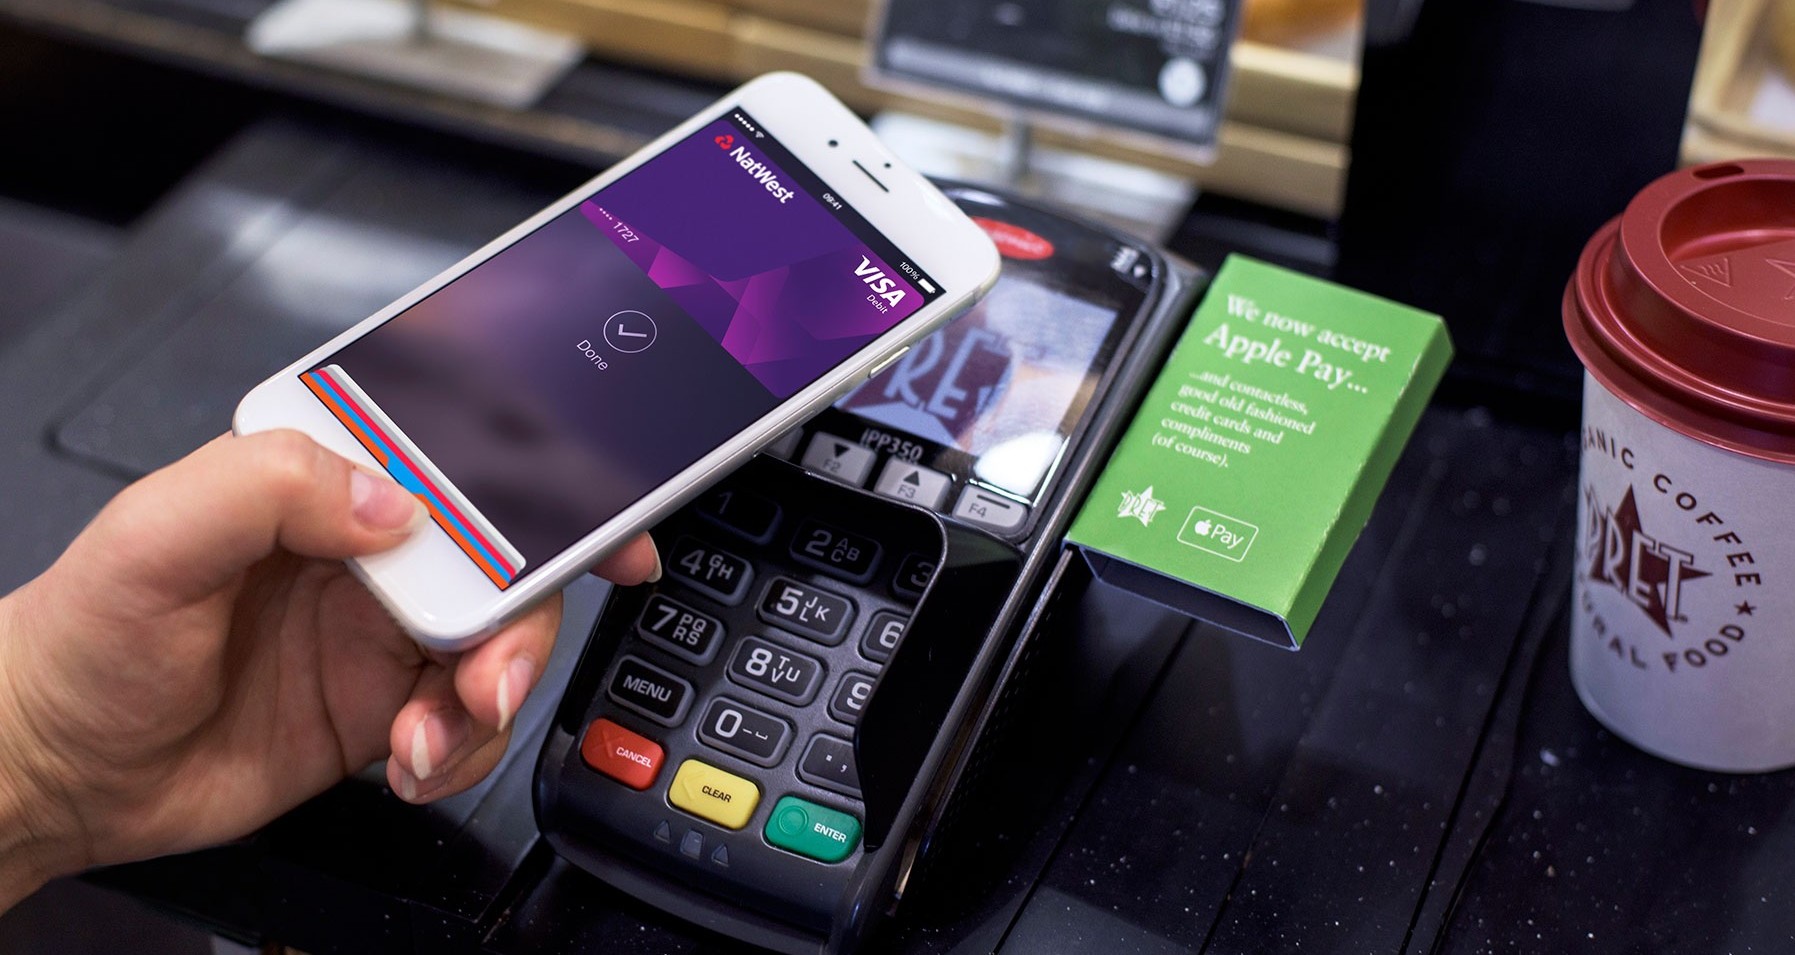 A customer paying with Apple Pay at a Pret A Manger branch